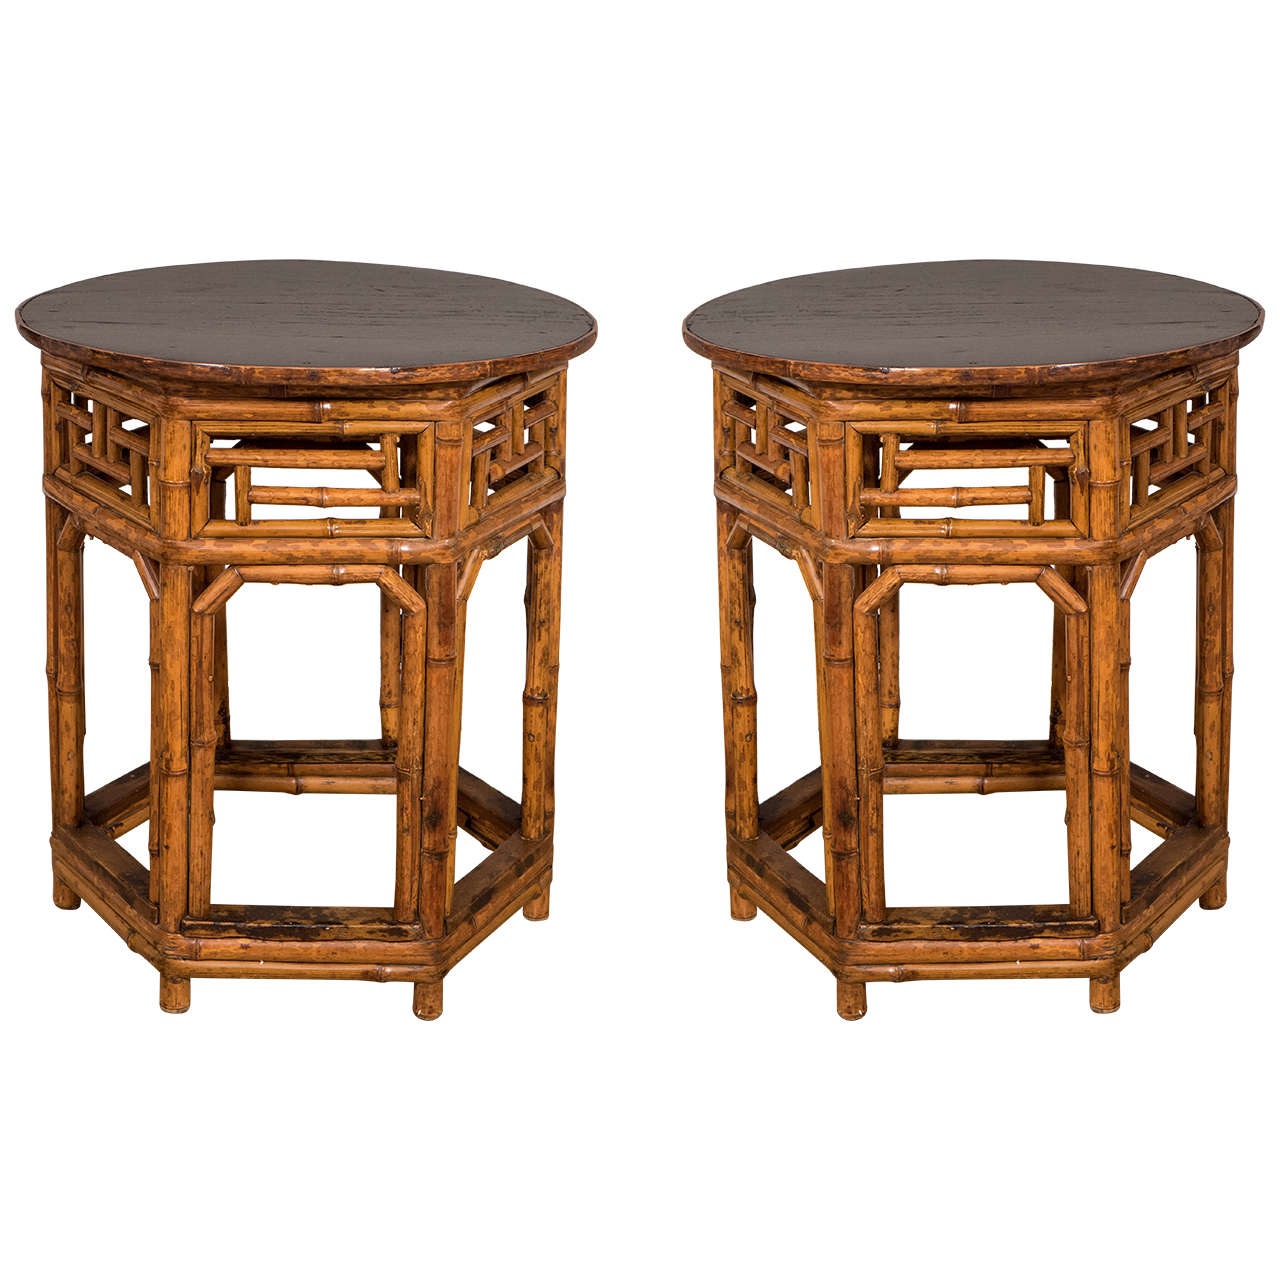 Fine Pair of Bamboo Tables with Ebonized Tops